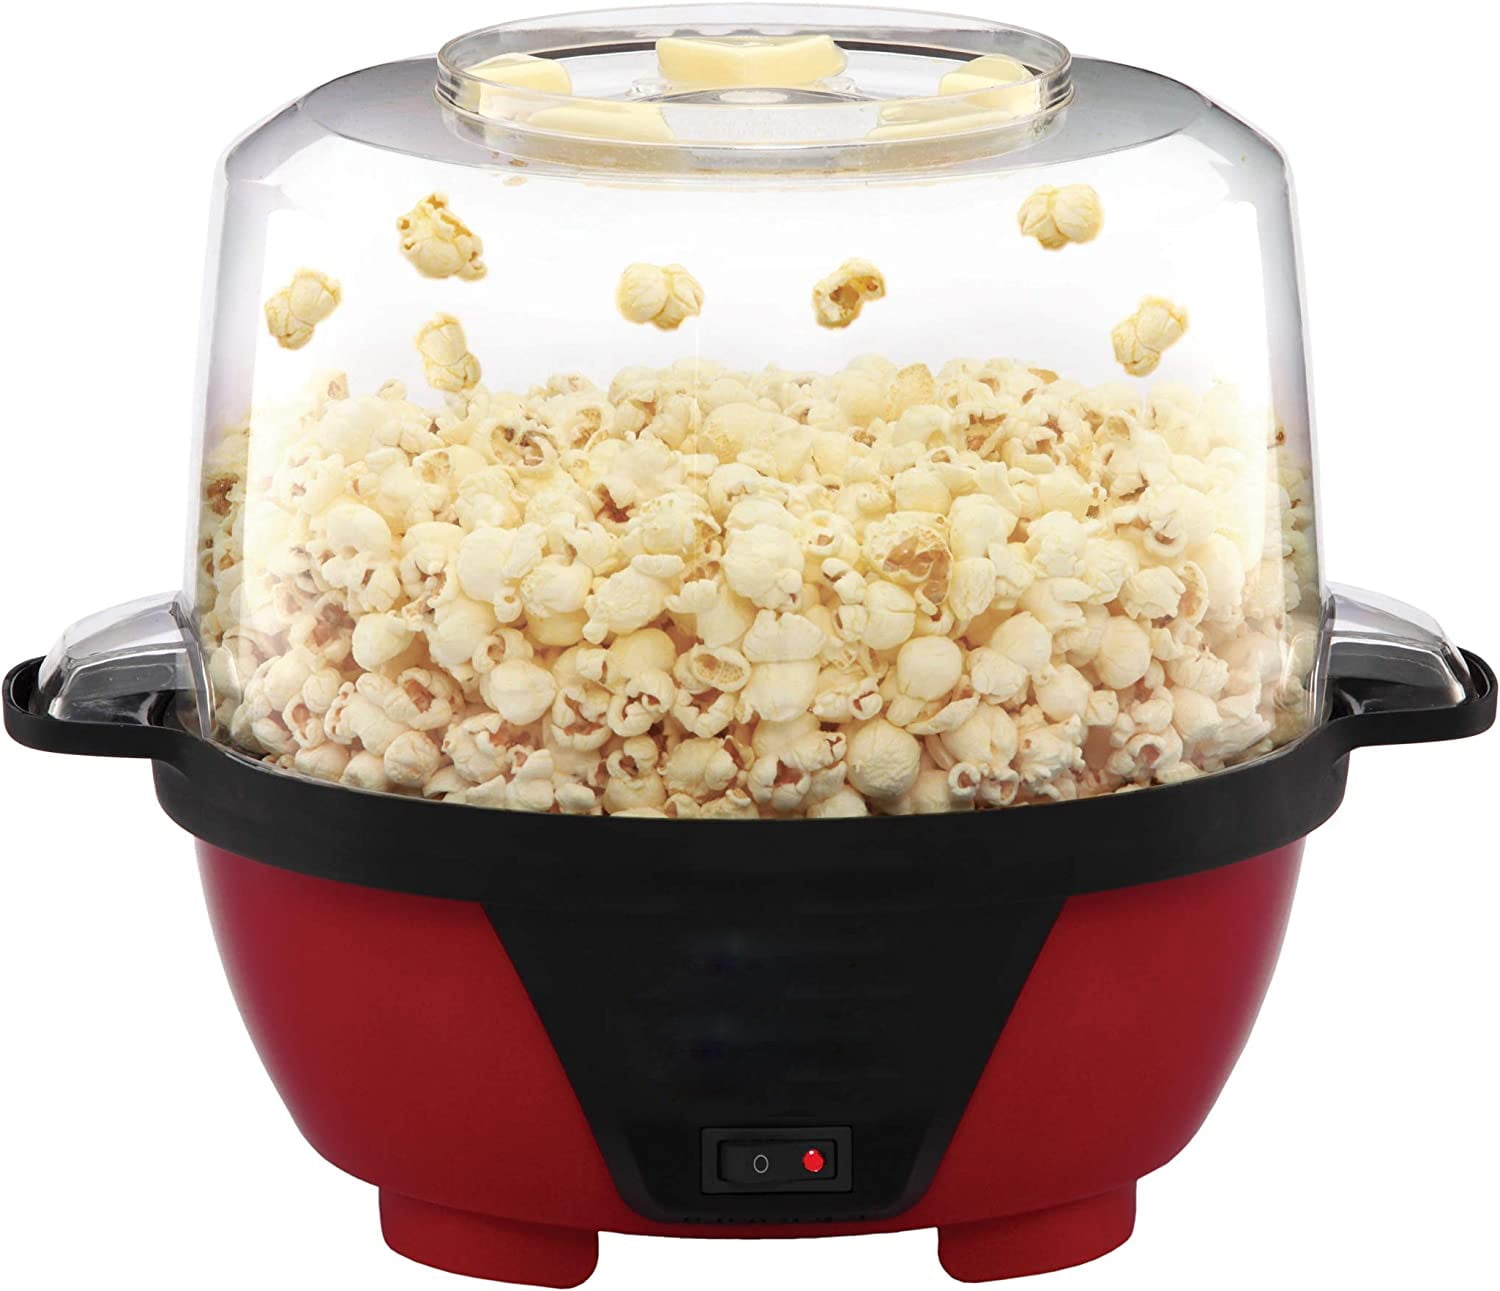  HEITIGN Electric Popcorn Maker Machine Air Popper Popcorn Maker  with Large Lid 1 Minutes Fast Making DIY Flavors1100W Air Popper Popcorn  Maker for Home Kitchen Dormitory Camping (EU Plug 220V) 